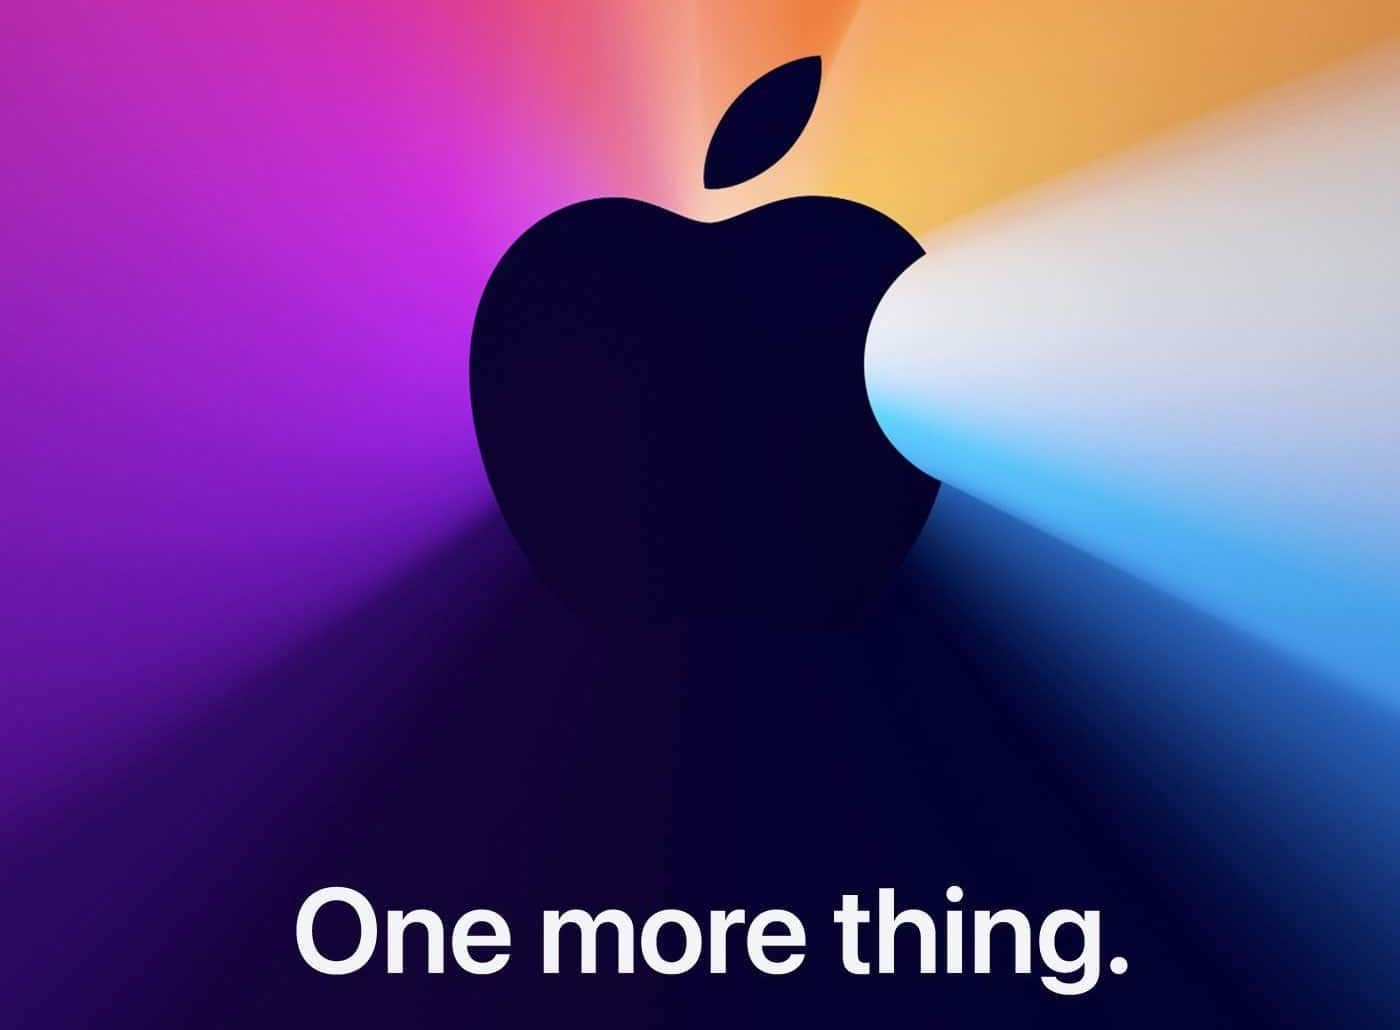 Apple 'One More Thing' Event Wallpaper .iphonehacks.com